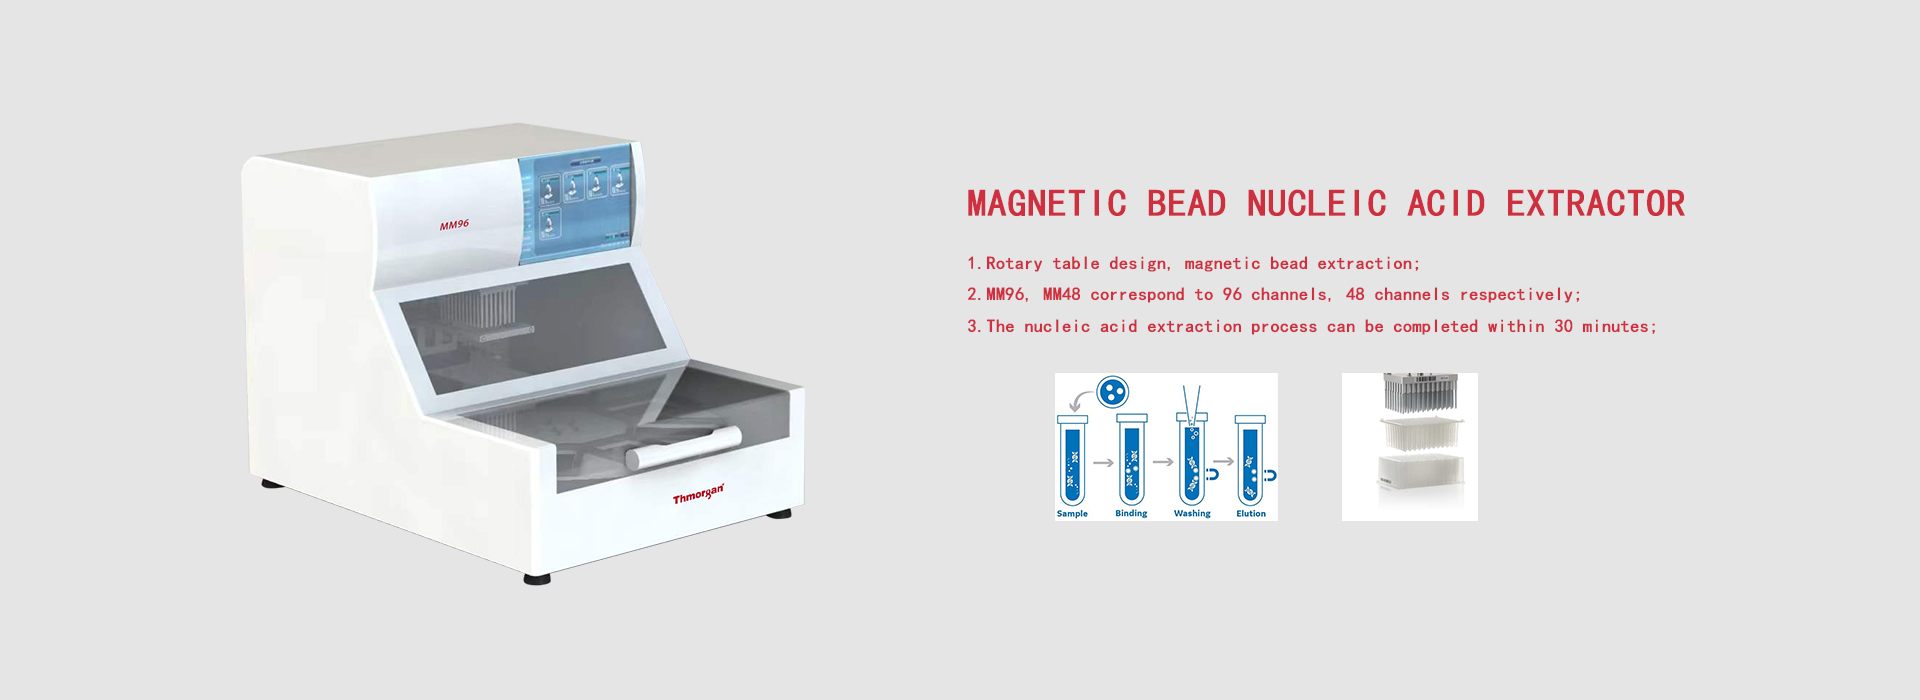 Magnetic bead nucleic acid extractor